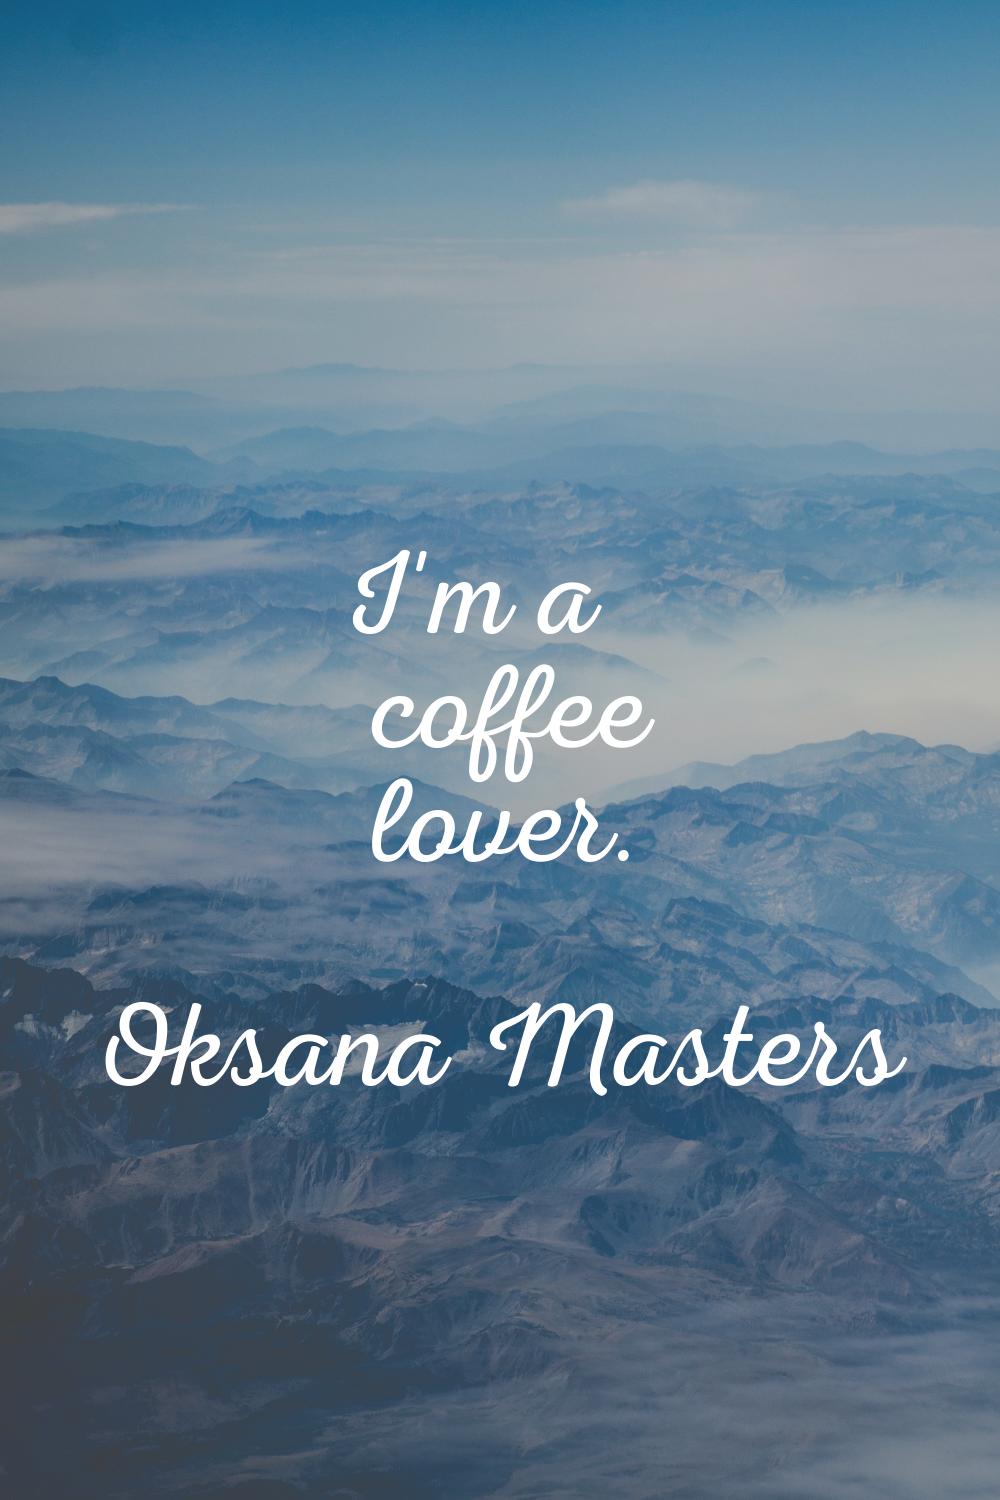 I'm a coffee lover.